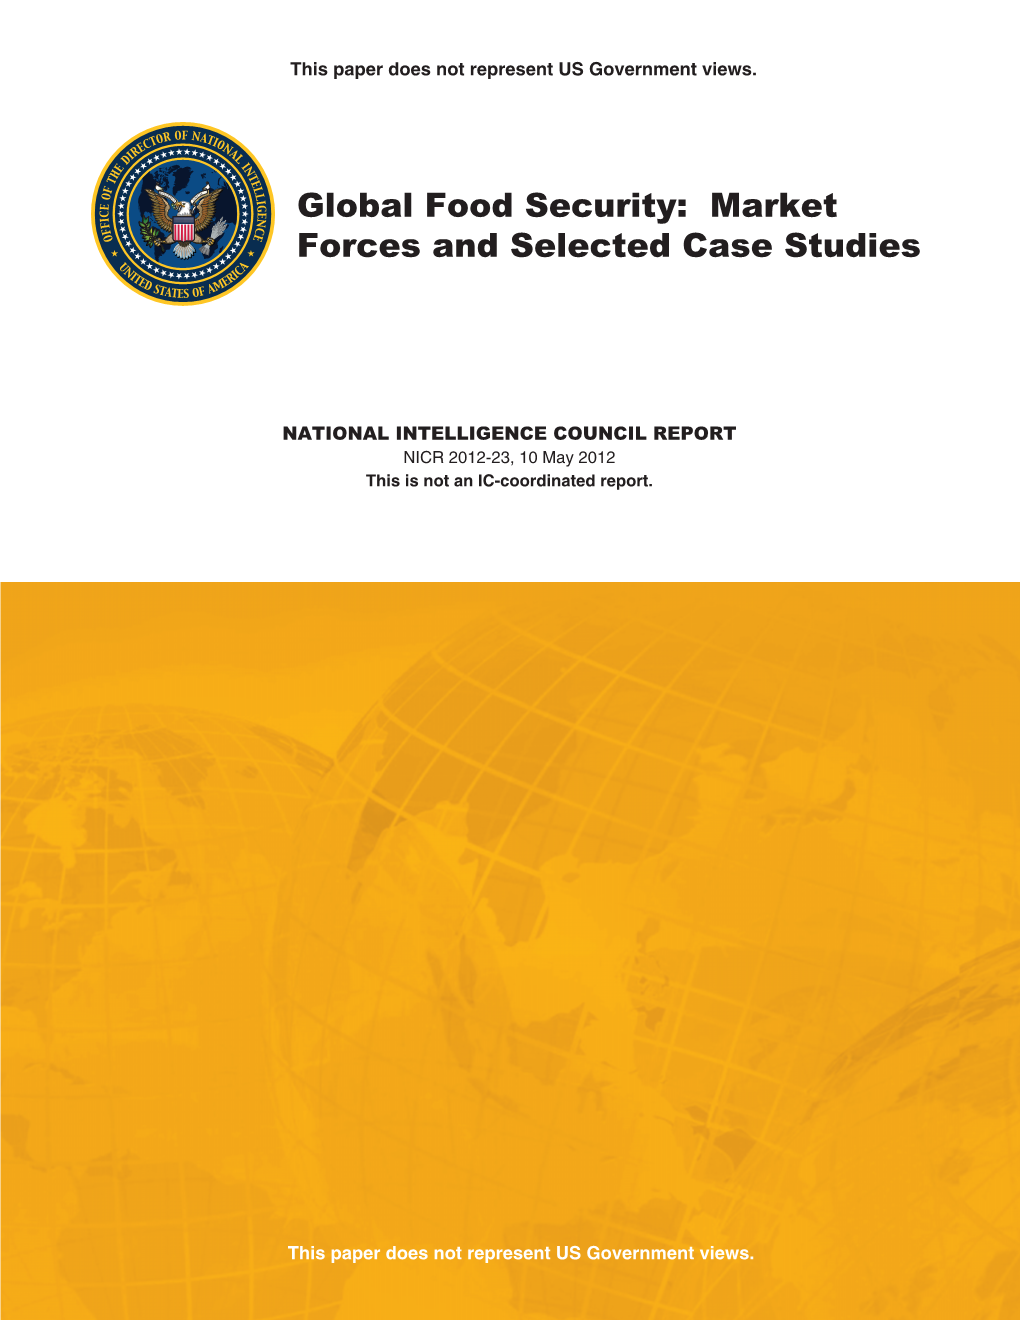 2015 Global Food Security: Market Forces and Selected Case Studies